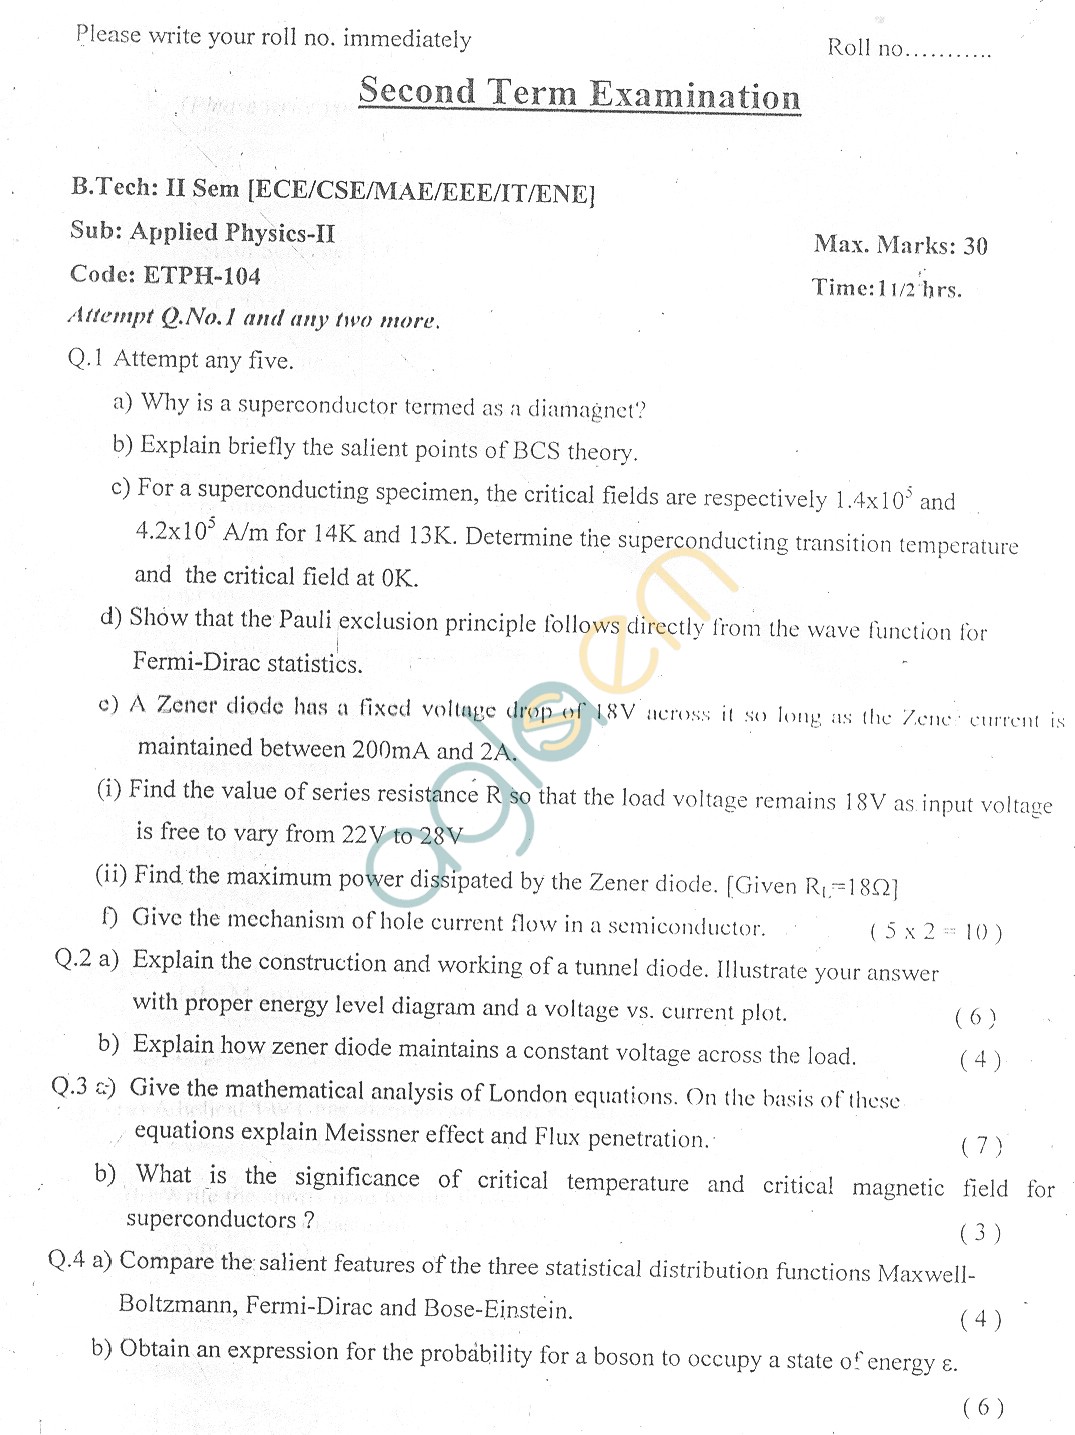 GGSIPU Question Papers Second Semester  Second Term 2006  ETPH-104